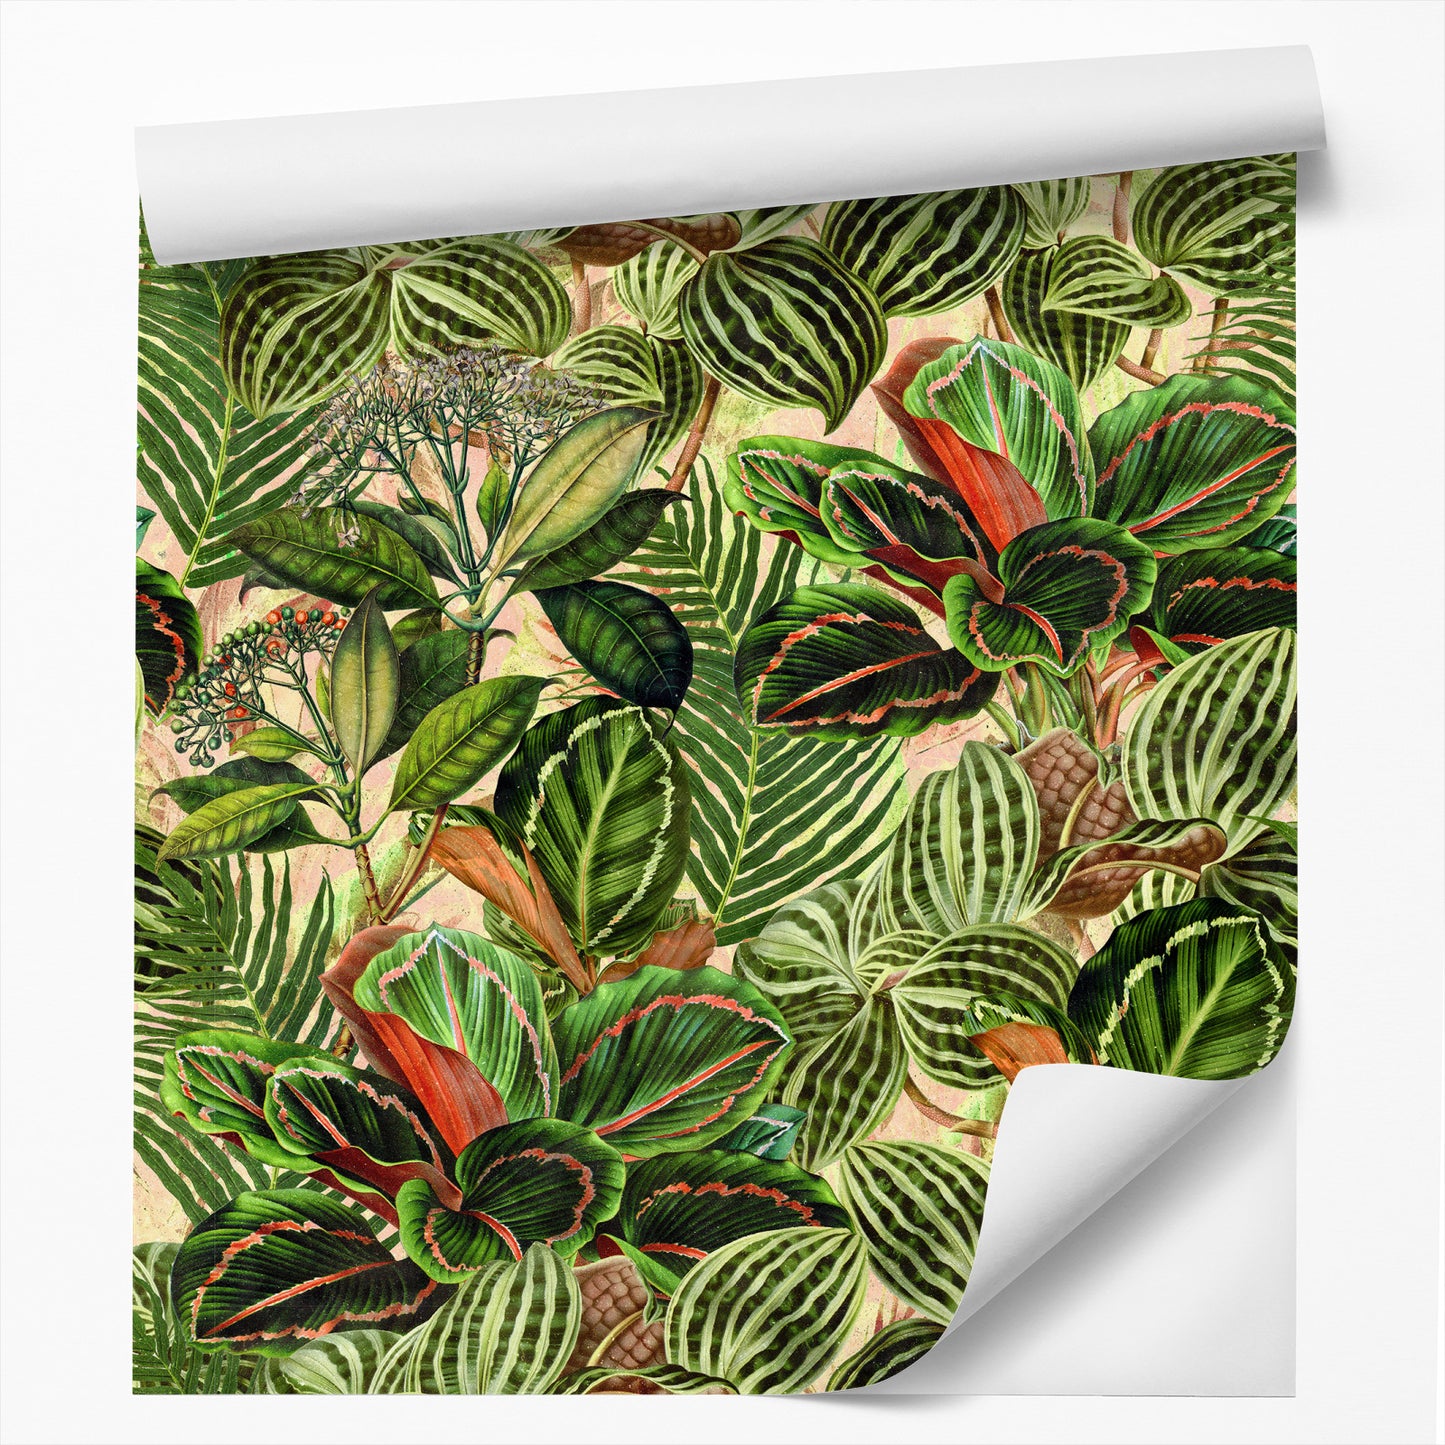 Peel & Stick Wallpaper Roll - Tropical Leaves by DecoWorks